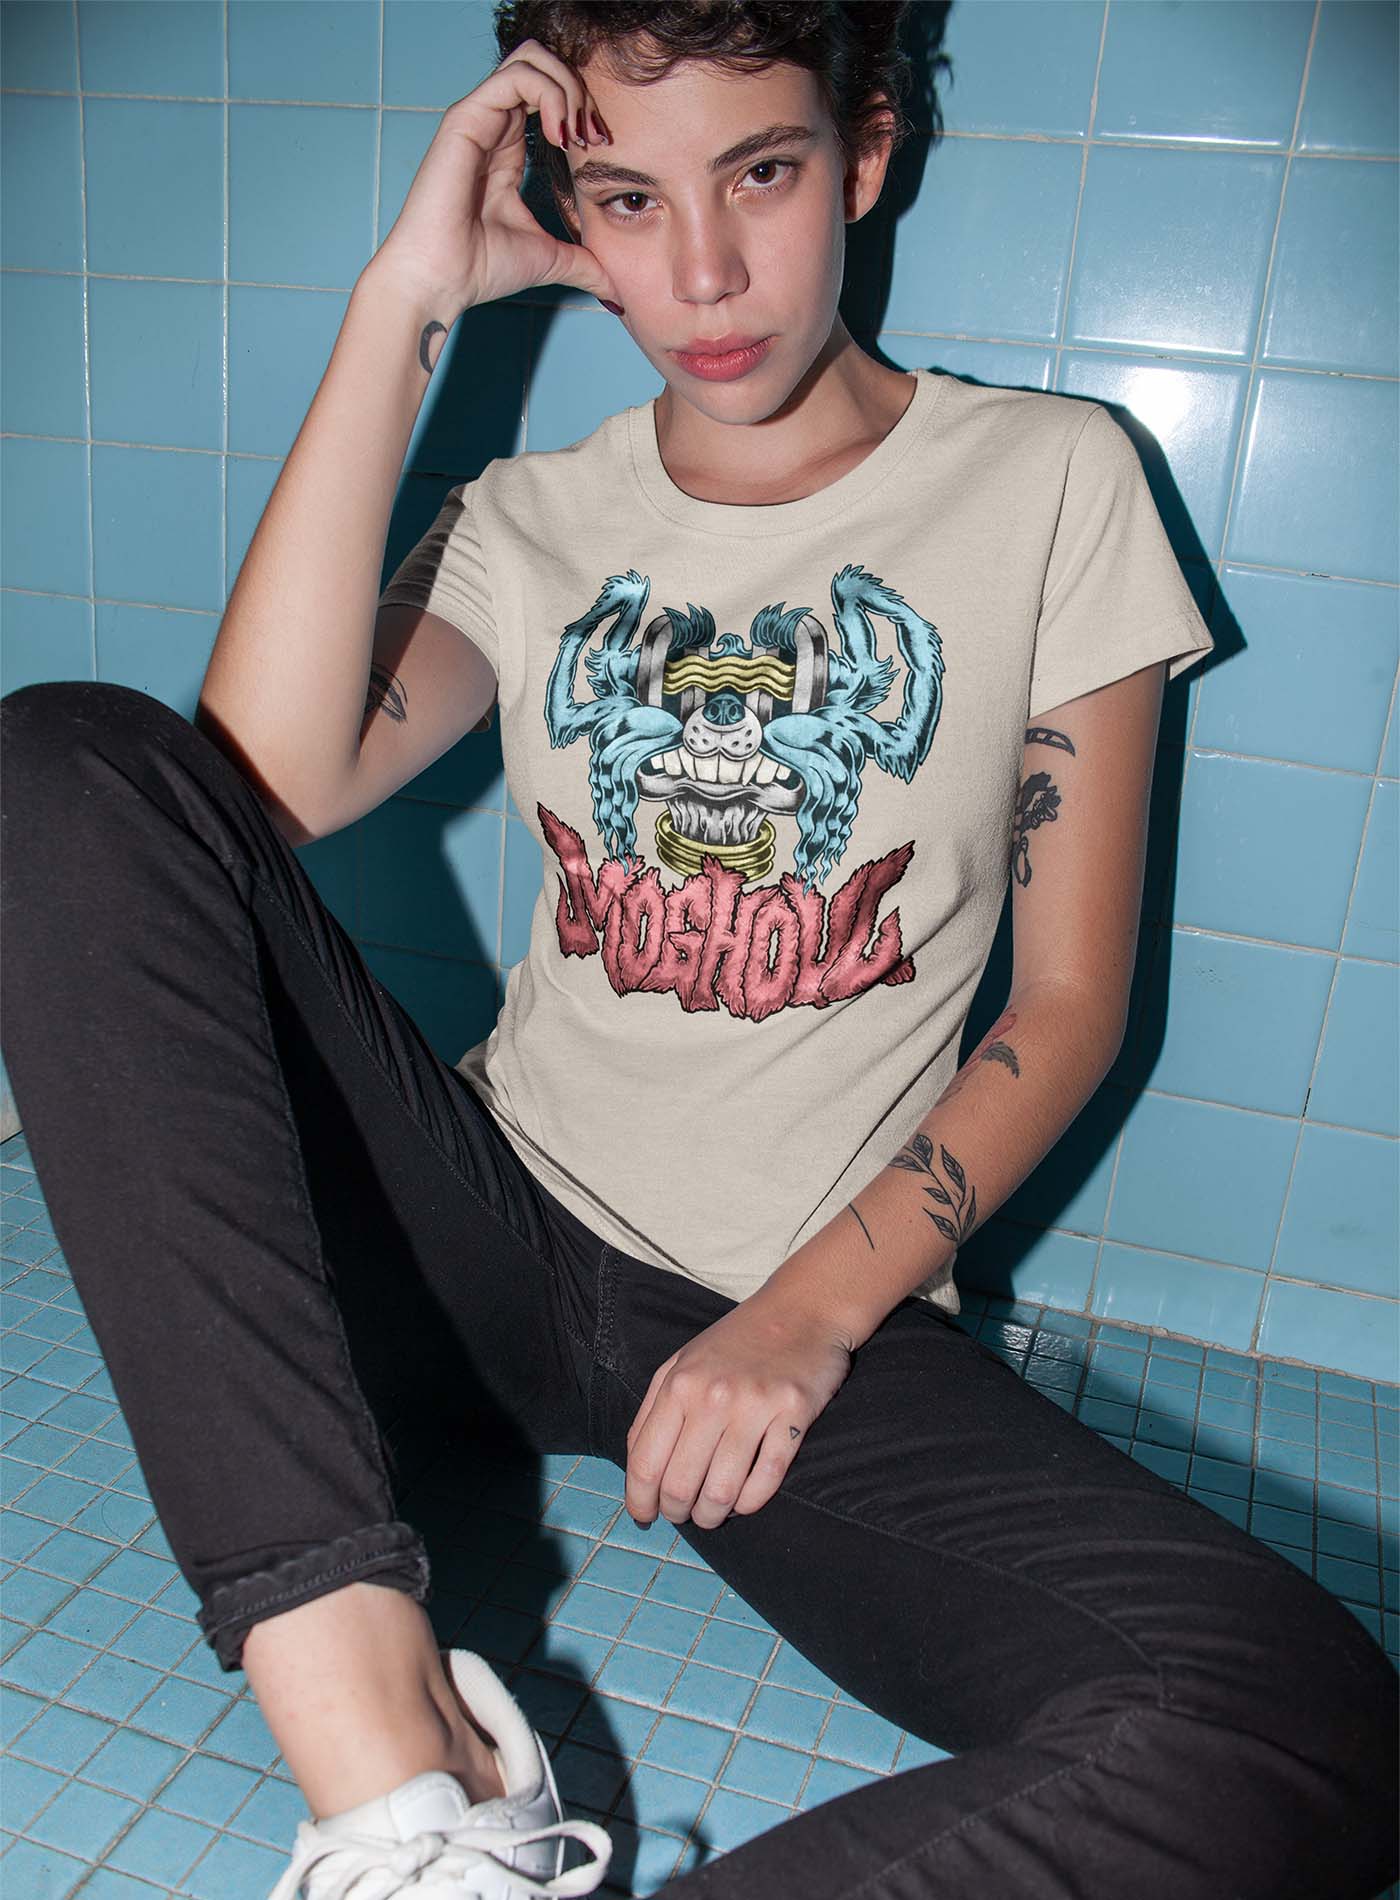 Female modeling a Heather beige unisex t-shirt featuring a front print of a dog and the Moghoul logo rendered in urban art style by Jason Hankins aka Jazmo.